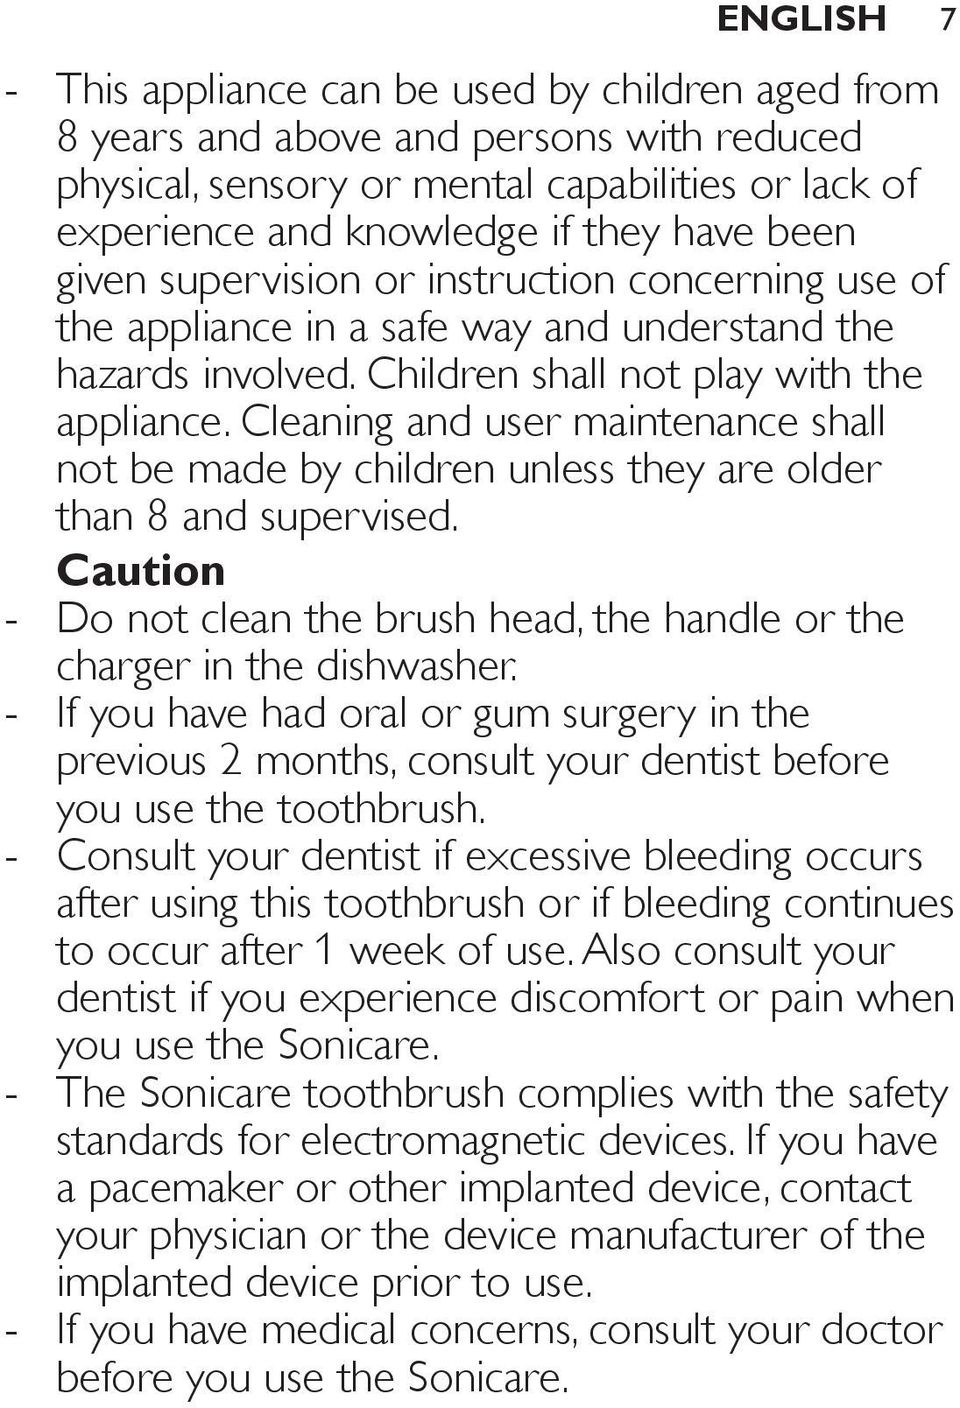 Cleaning and user maintenance shall not be made by children unless they are older than 8 and supervised. Caution Do not clean the brush head, the handle or the charger in the dishwasher.